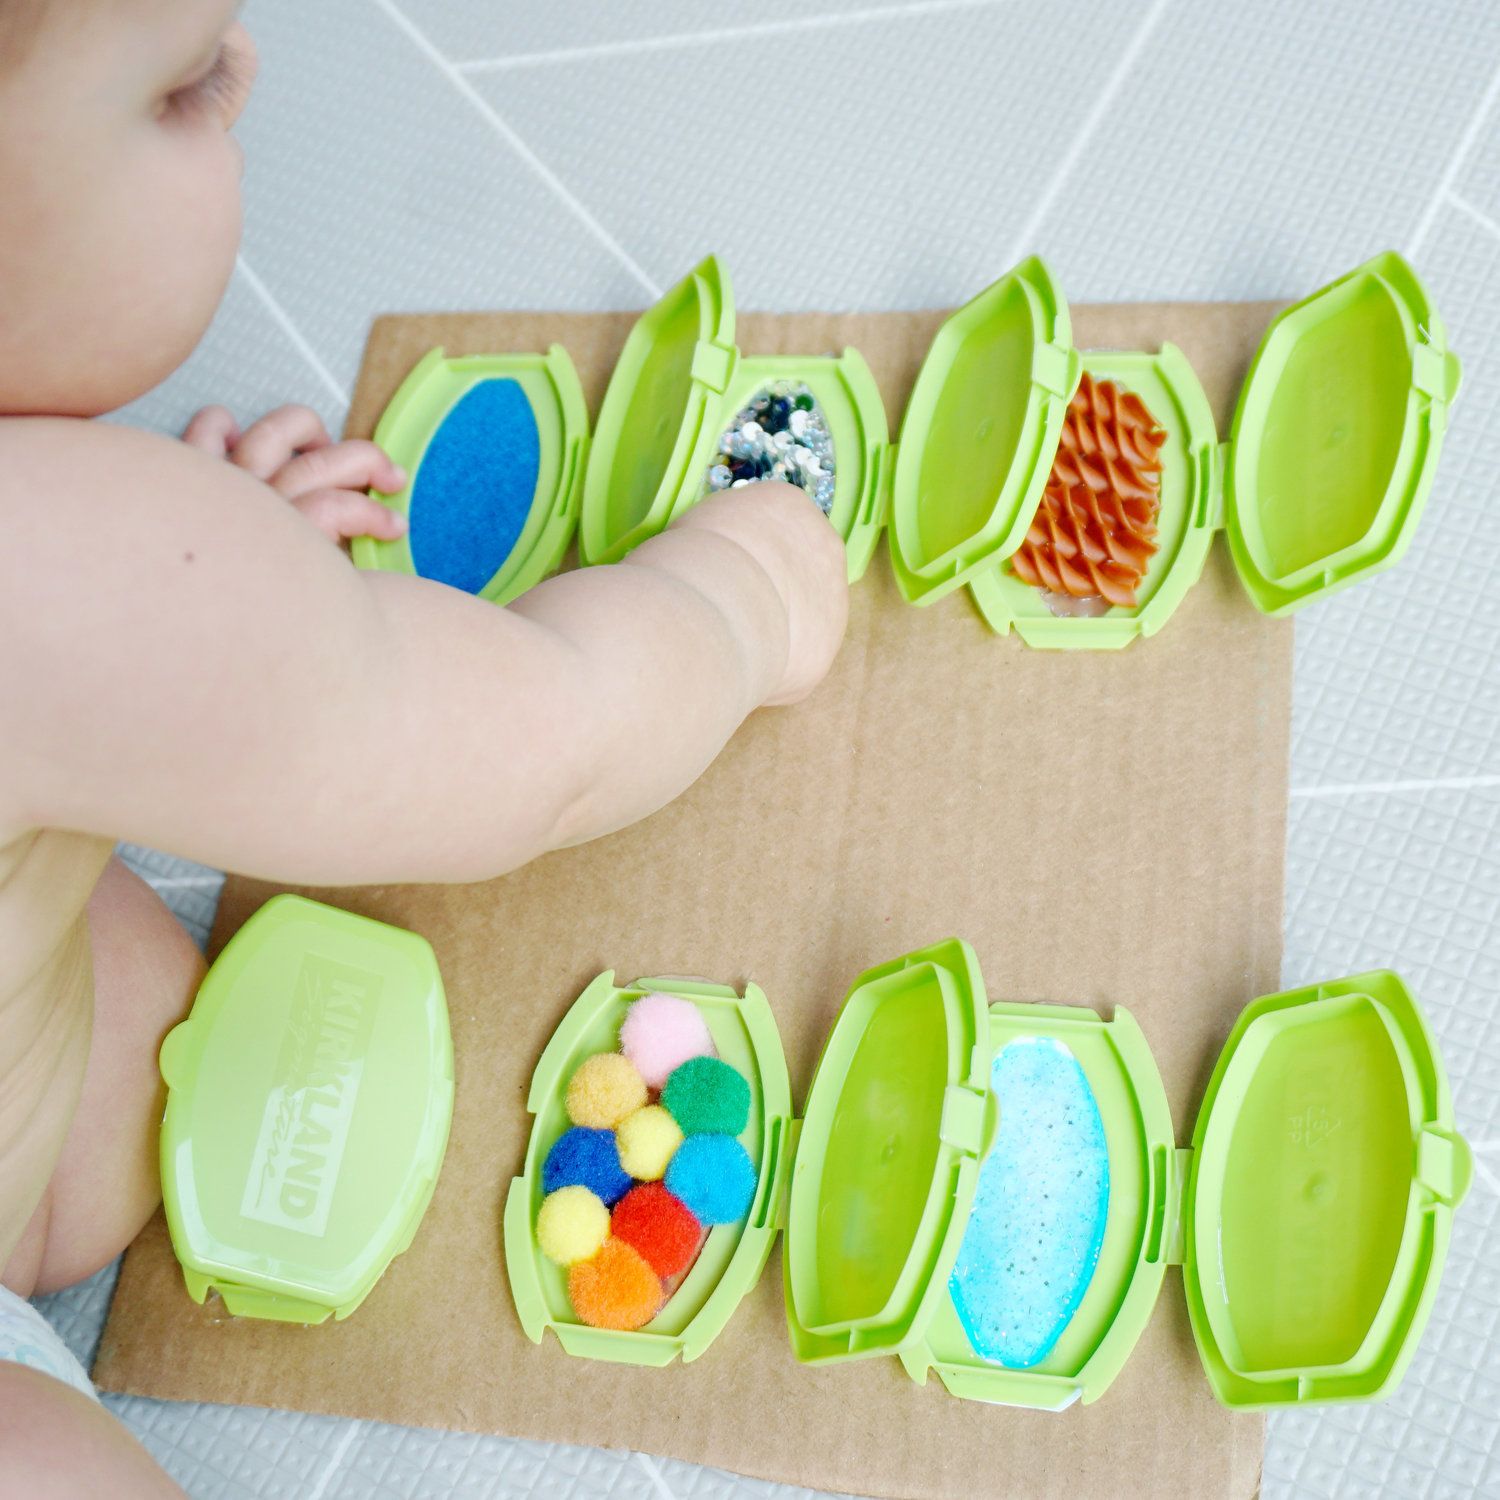 learning activity toys for 1 year old